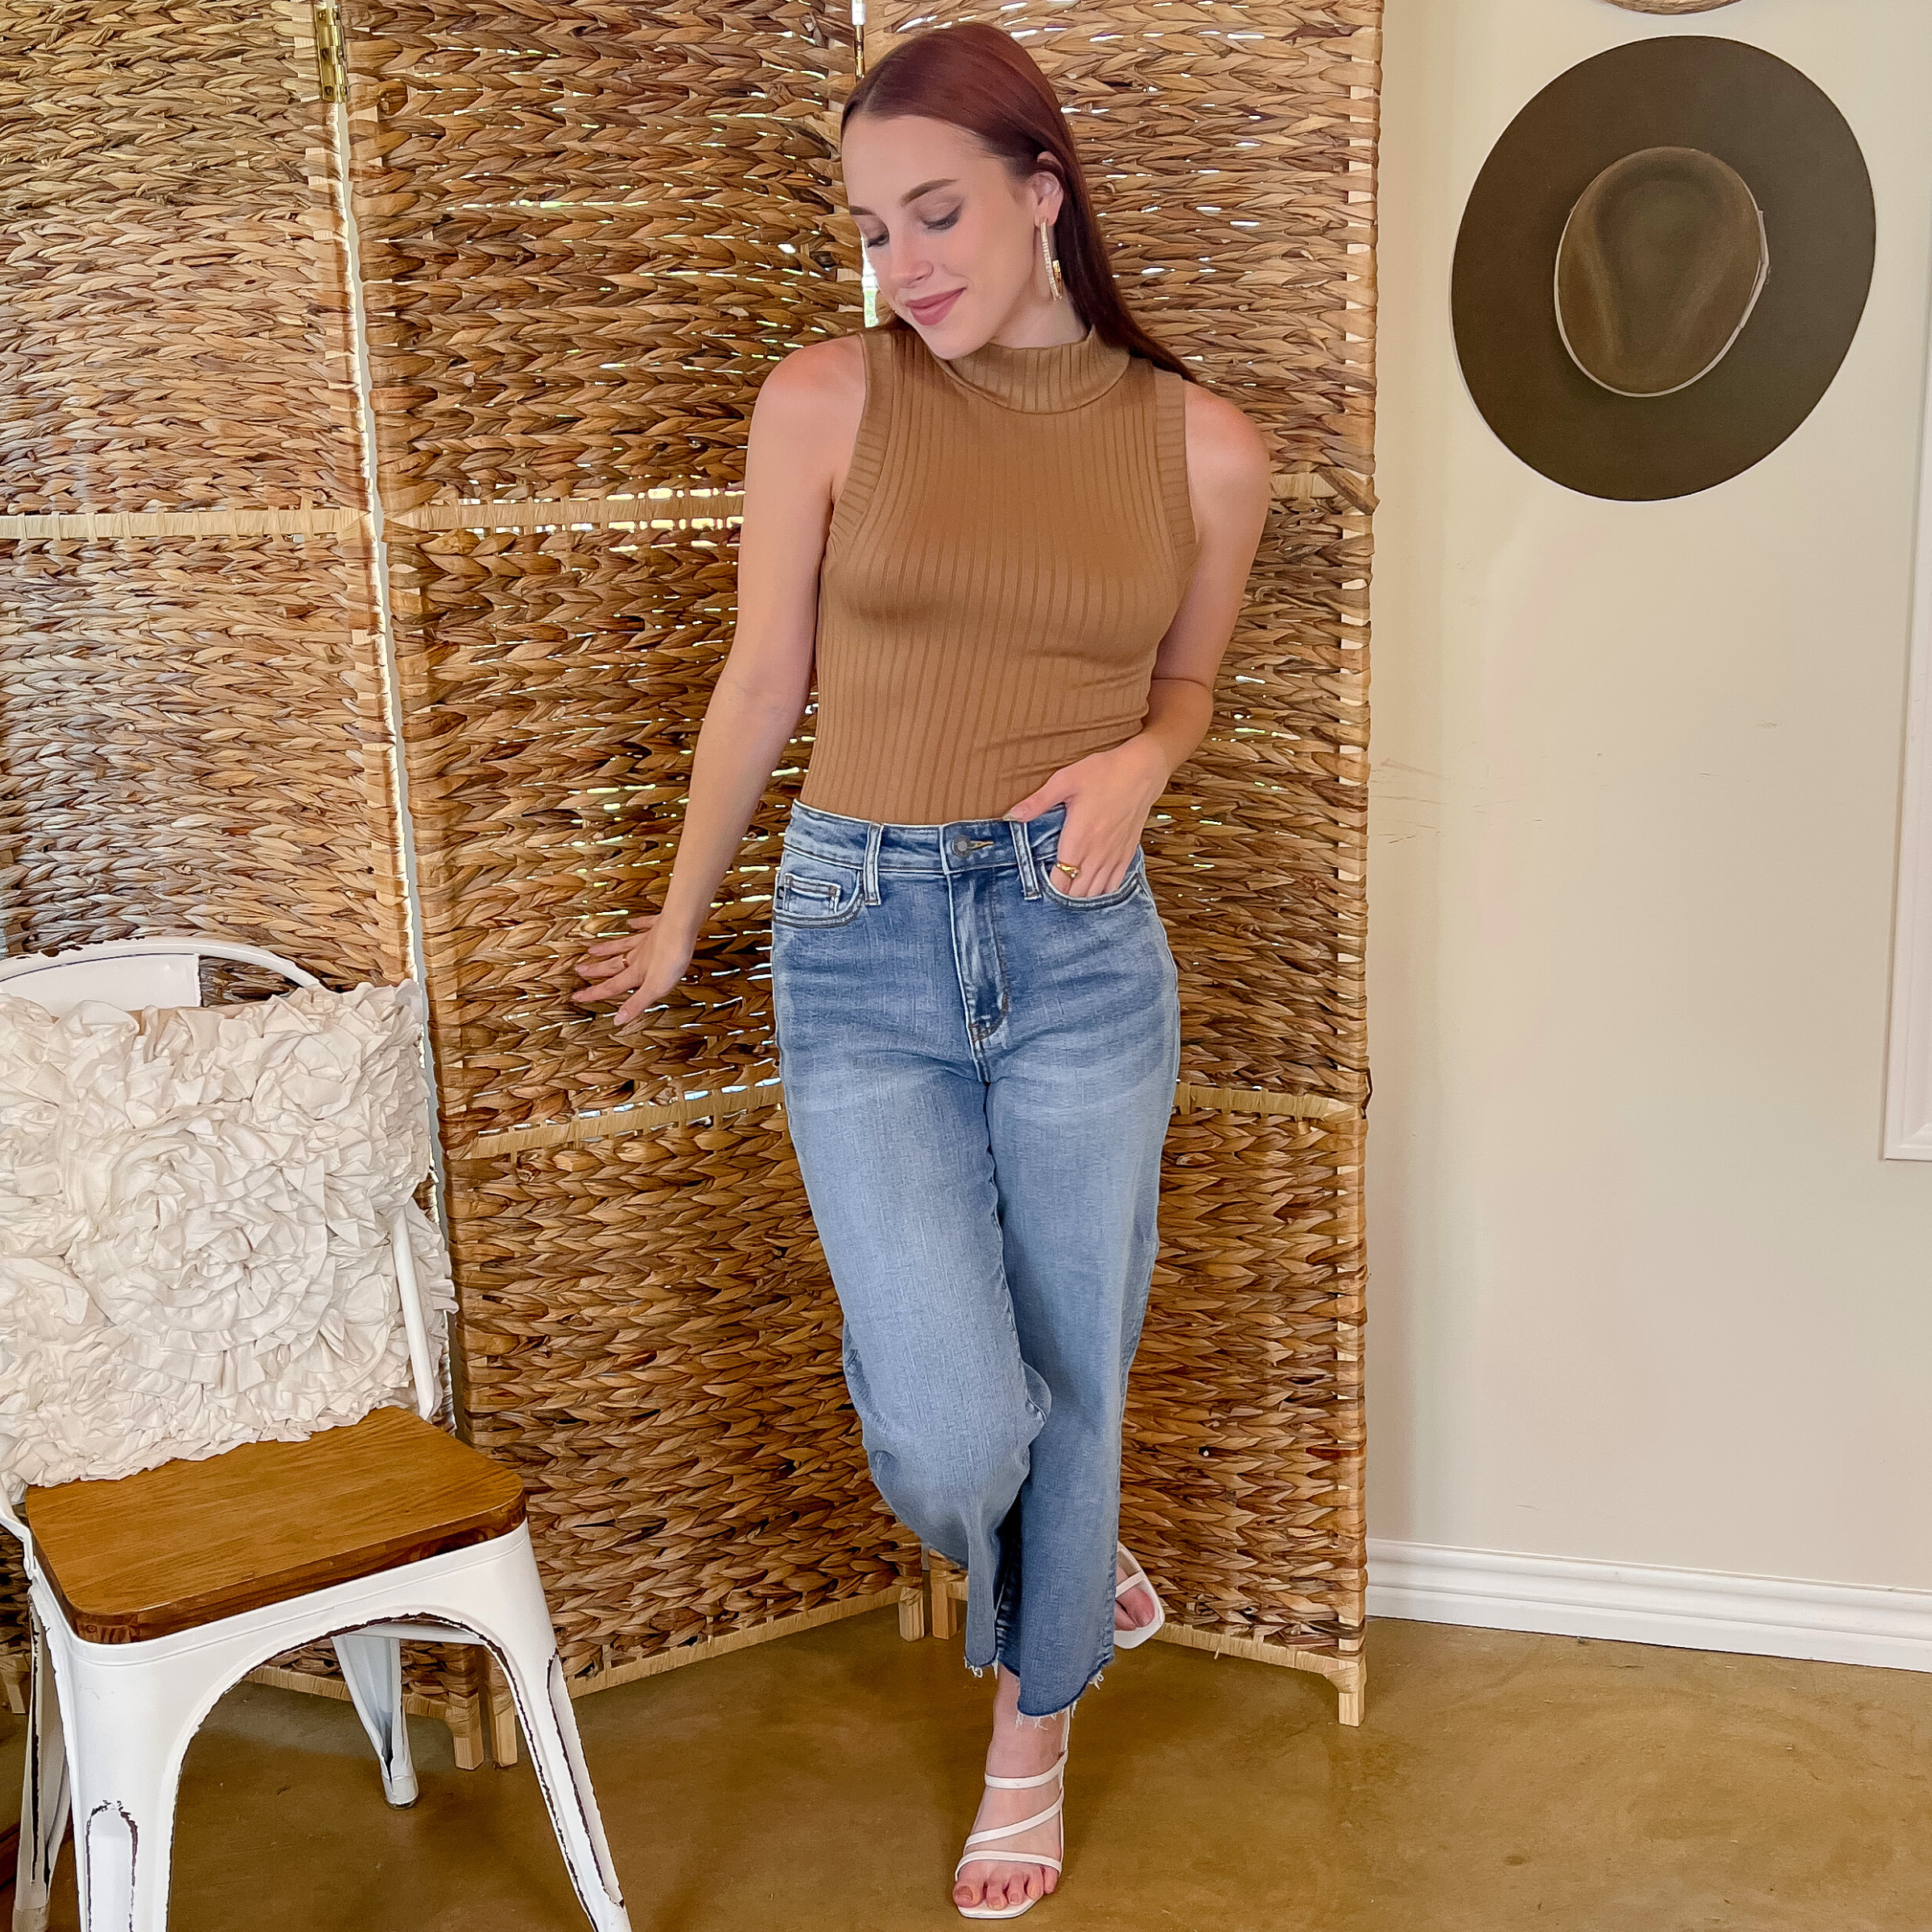 Model is wearing a high neck, ribbed tank top in mocha/brown.  She is also wearing a long gold earrings, light wash jeans, and white strappy  heels.